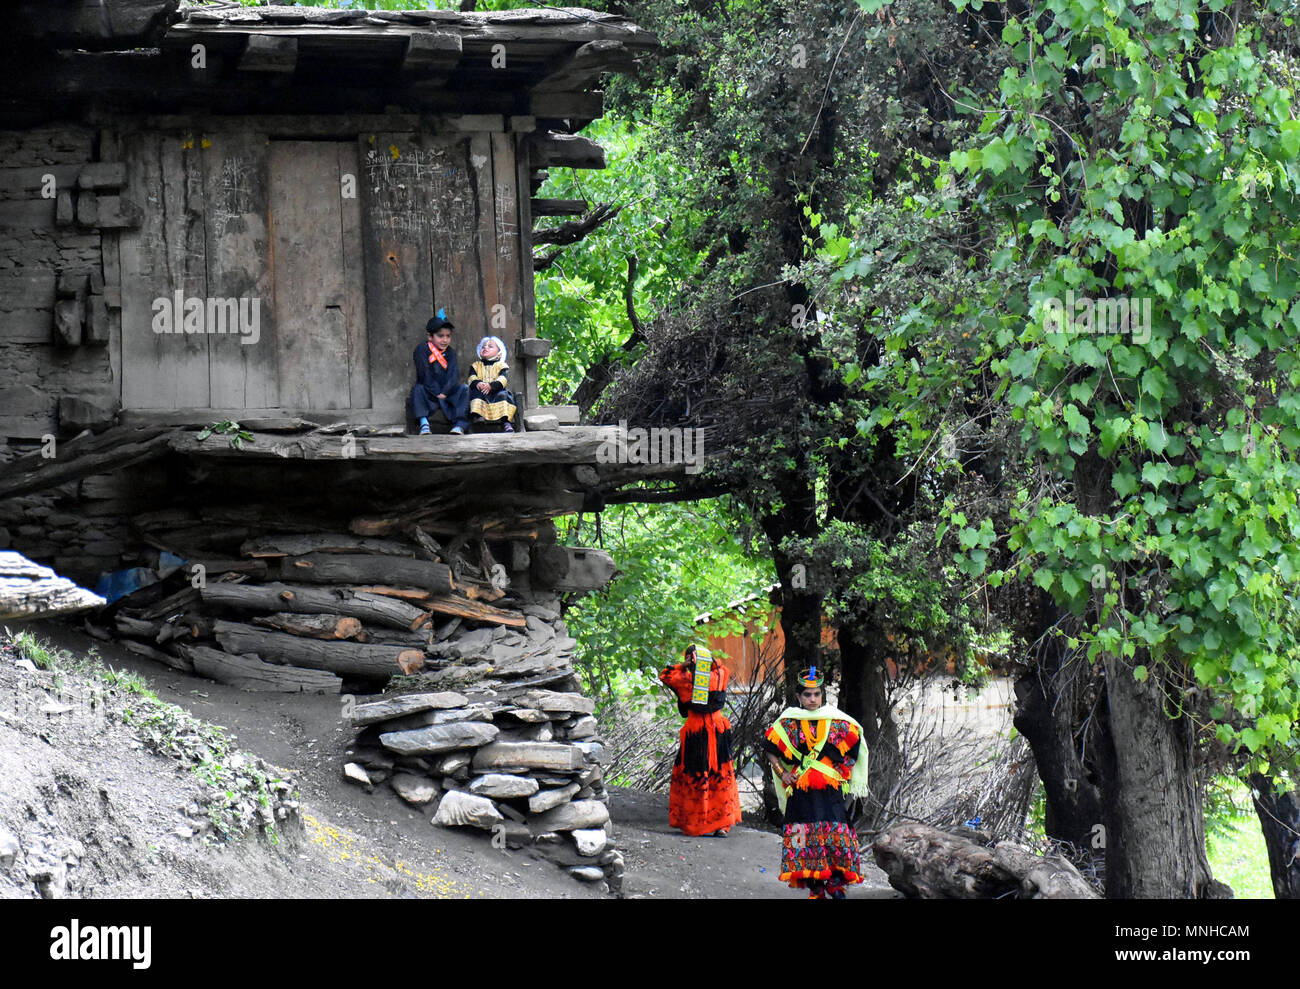 kalash-valley-pakistan-18th-may-2018-kalash-children-play-outside-their-home-in-kalash-valley-in-northwest-pakistans-chitral-district-on-may-14-2018-the-kalash-are-the-ancient-tribe-of-pakistan-and-they-have-their-own-way-of-life-religion-language-rituals-and-identity-credit-saeed-ahmad-sxkxinhuaalamy-live-news-MNHCAM.jpg